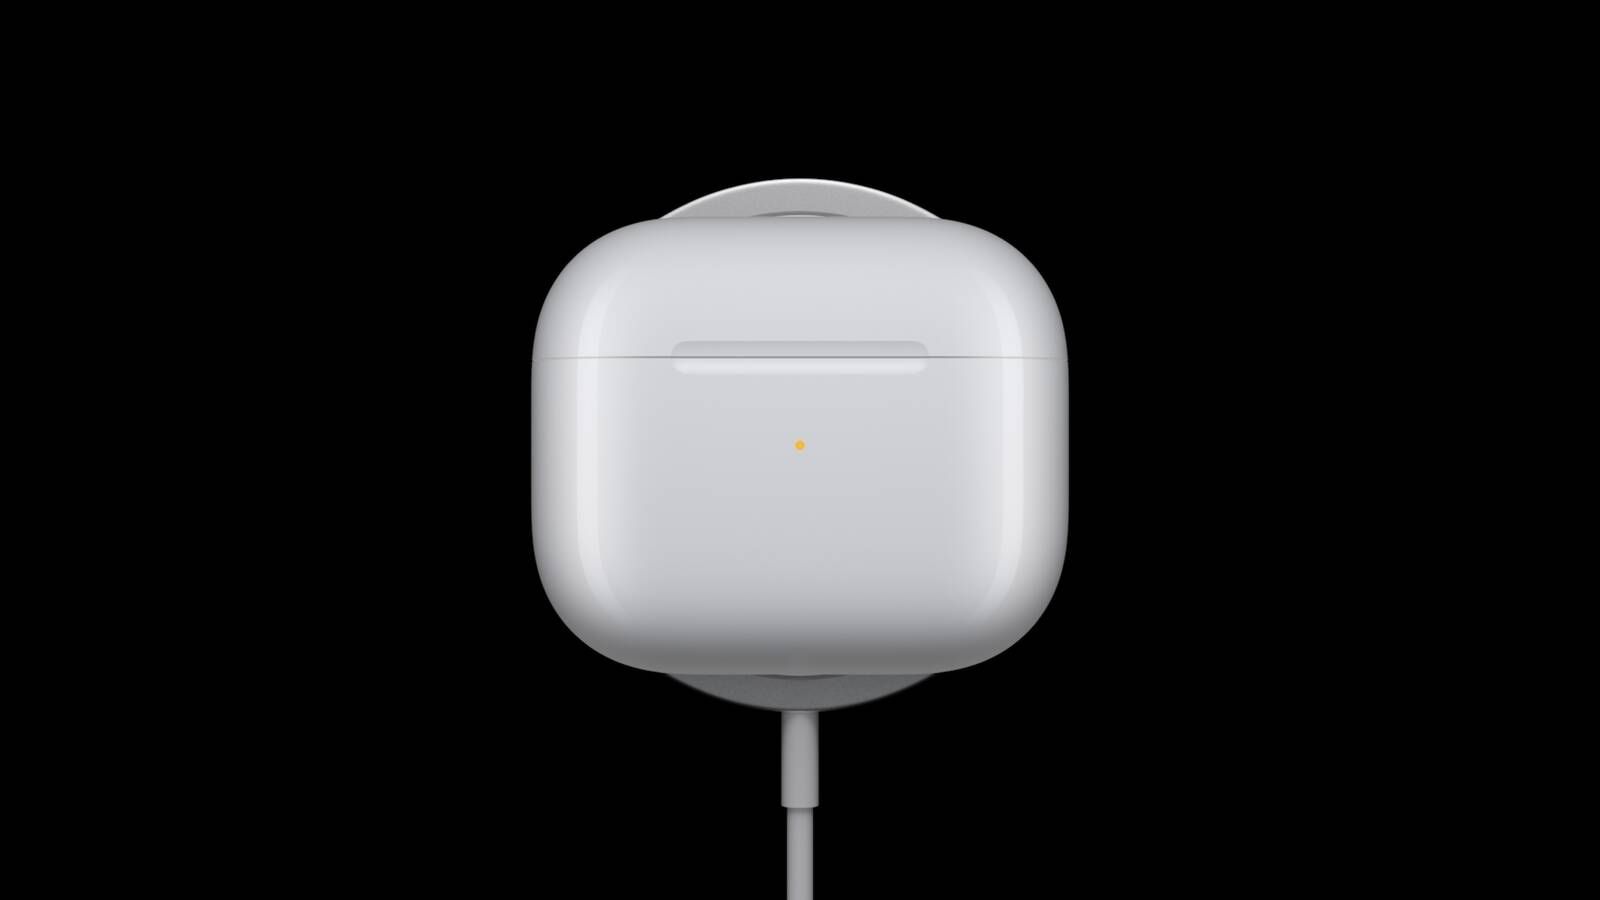 AirPods Pro Now Available With MagSafe Charging Case for Same $249 Price -  MacRumors